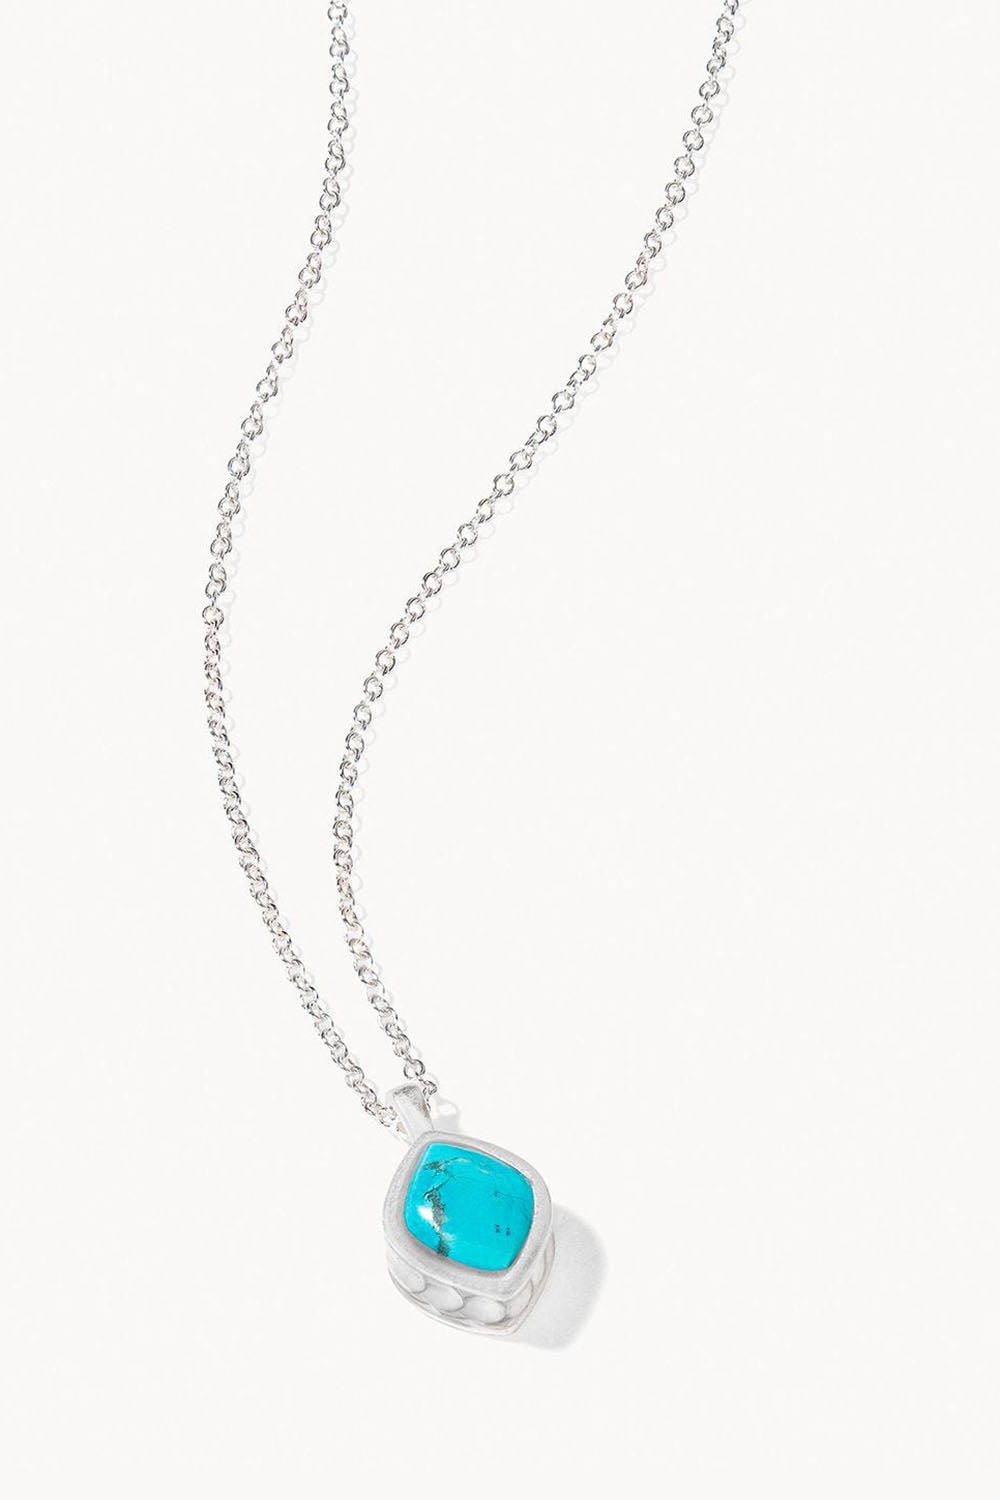 Naia Petite Necklace - Turquoise Silver